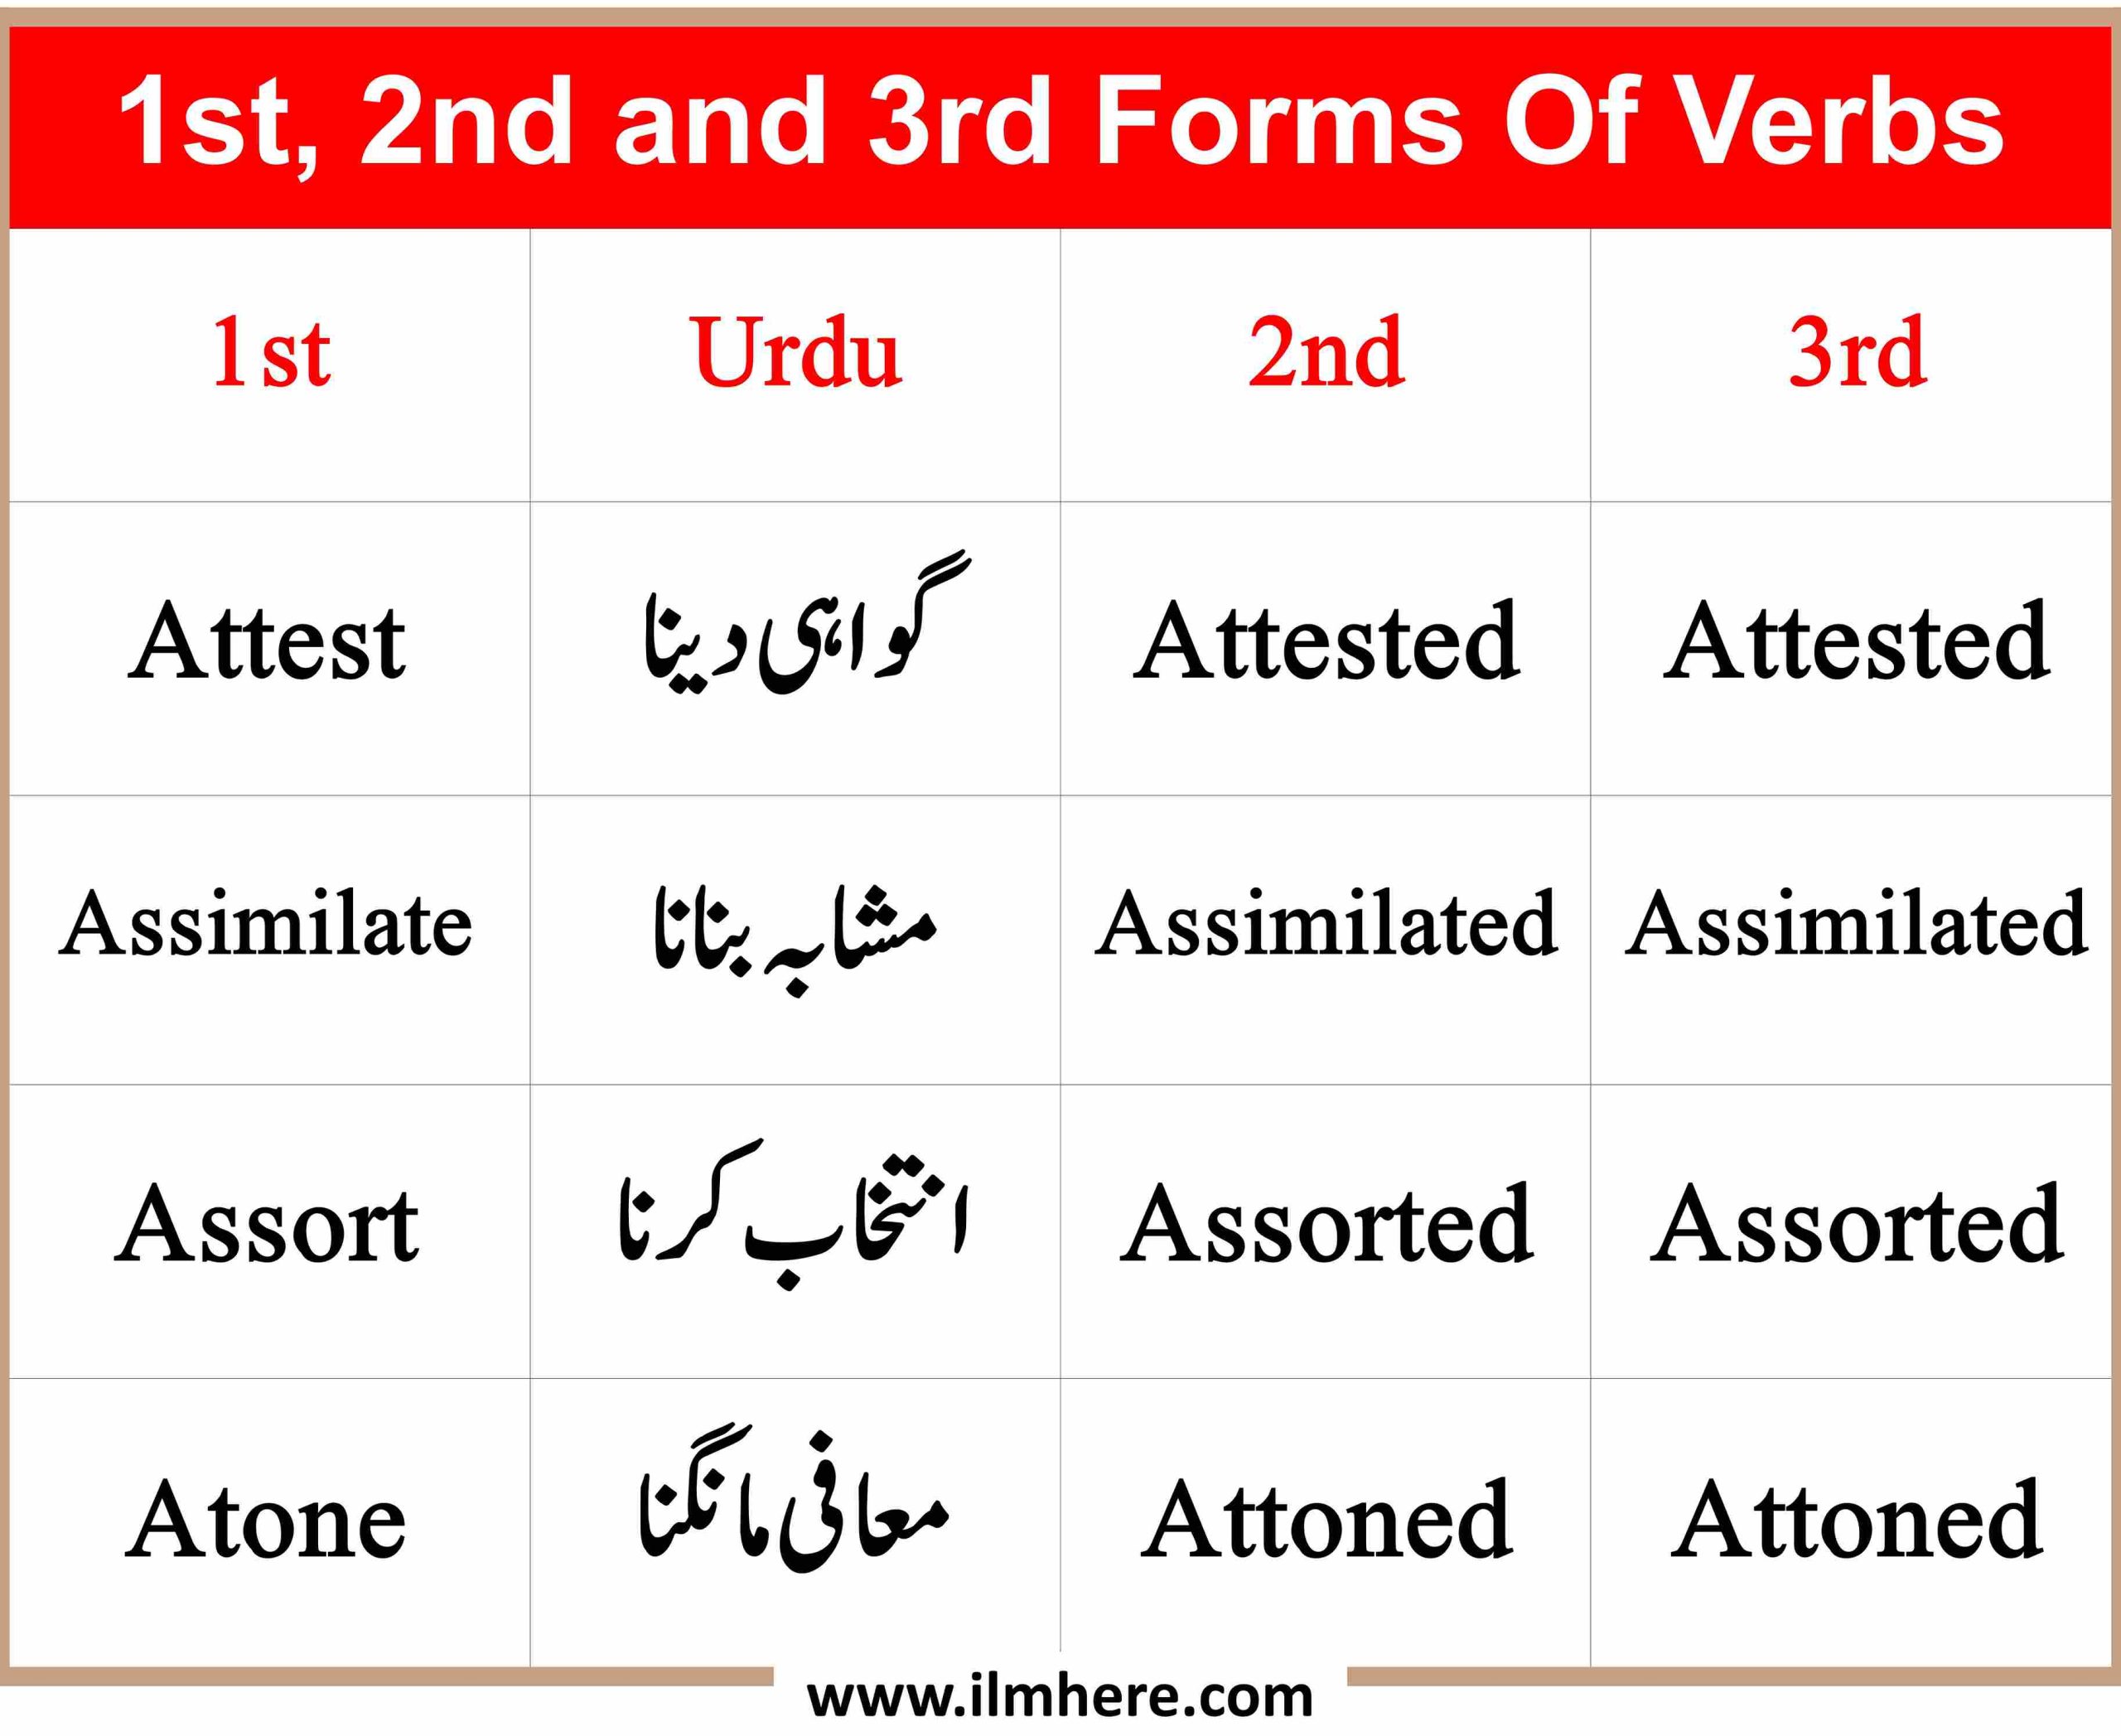 500+ 1st, 2nd, and 3rd Forms Of Verbs with English to Urdu Meanings